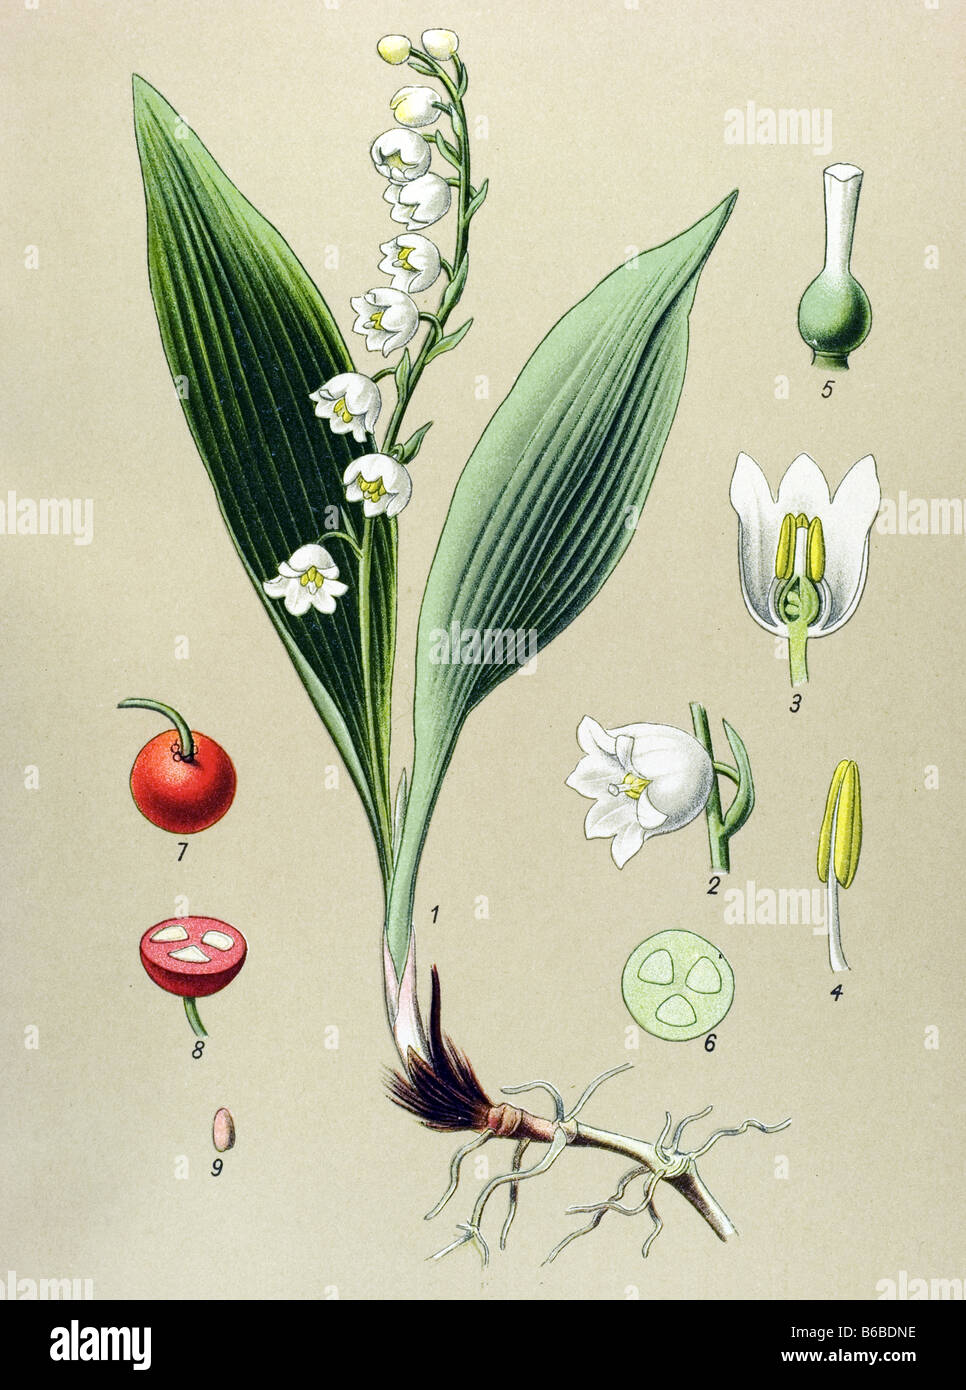 Convallaria majalis, Lily of the Valley, poisonous plants illustrations Stock Photo